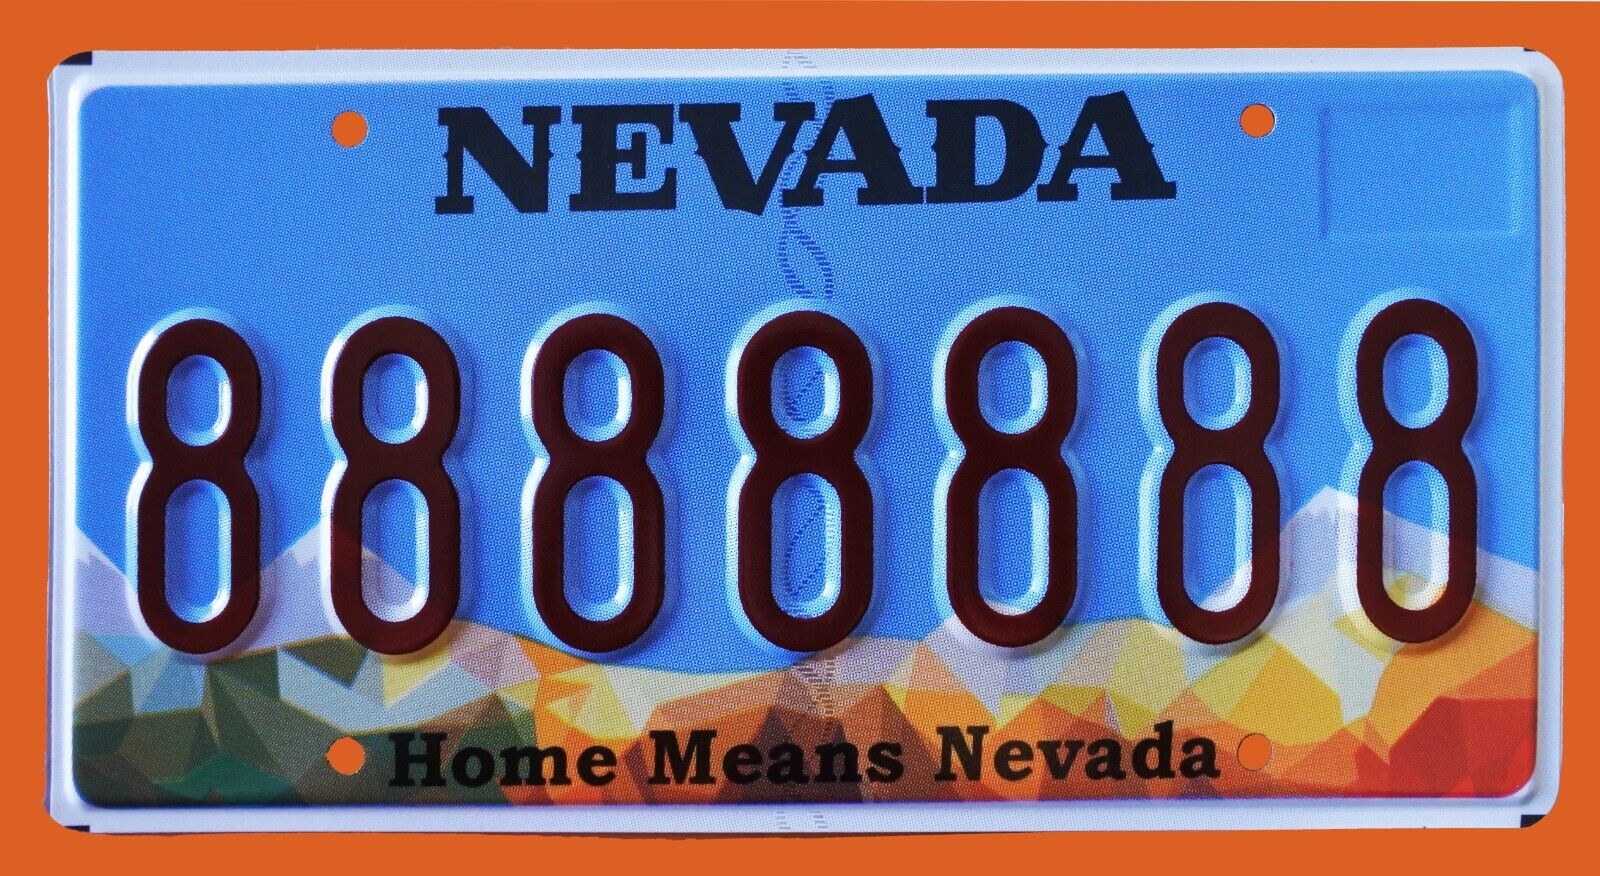 Home Means Nevada Vanity License Plate " 8888888 "